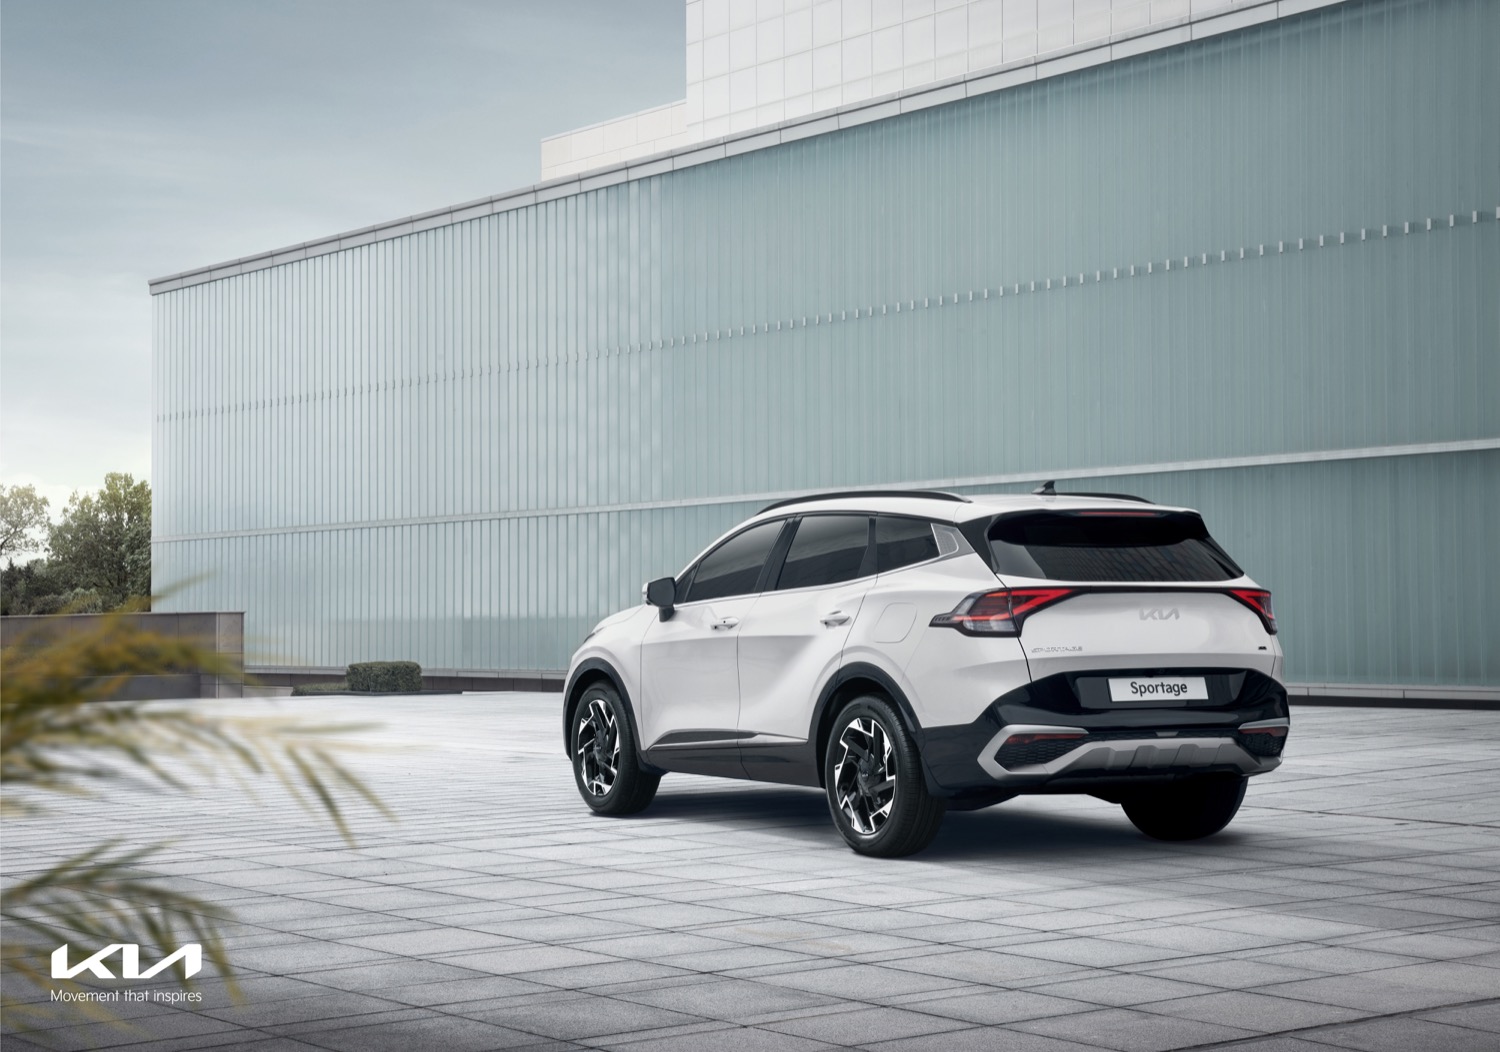 2023 Kia Sportage Revealed With More Room, More Power, More Style